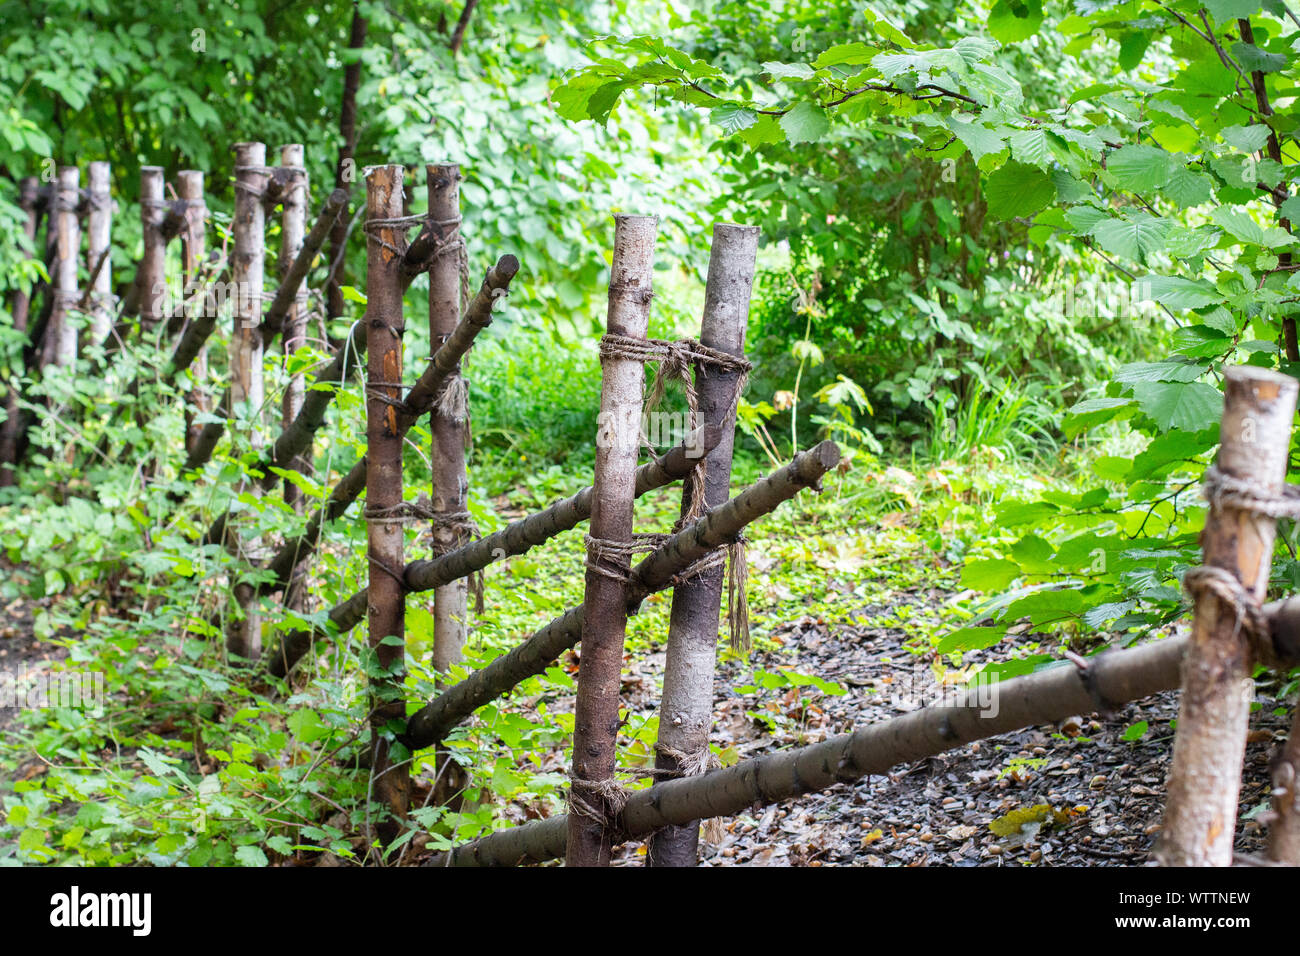 A rustic fence made of thin tree trunks fastened with a rope, a